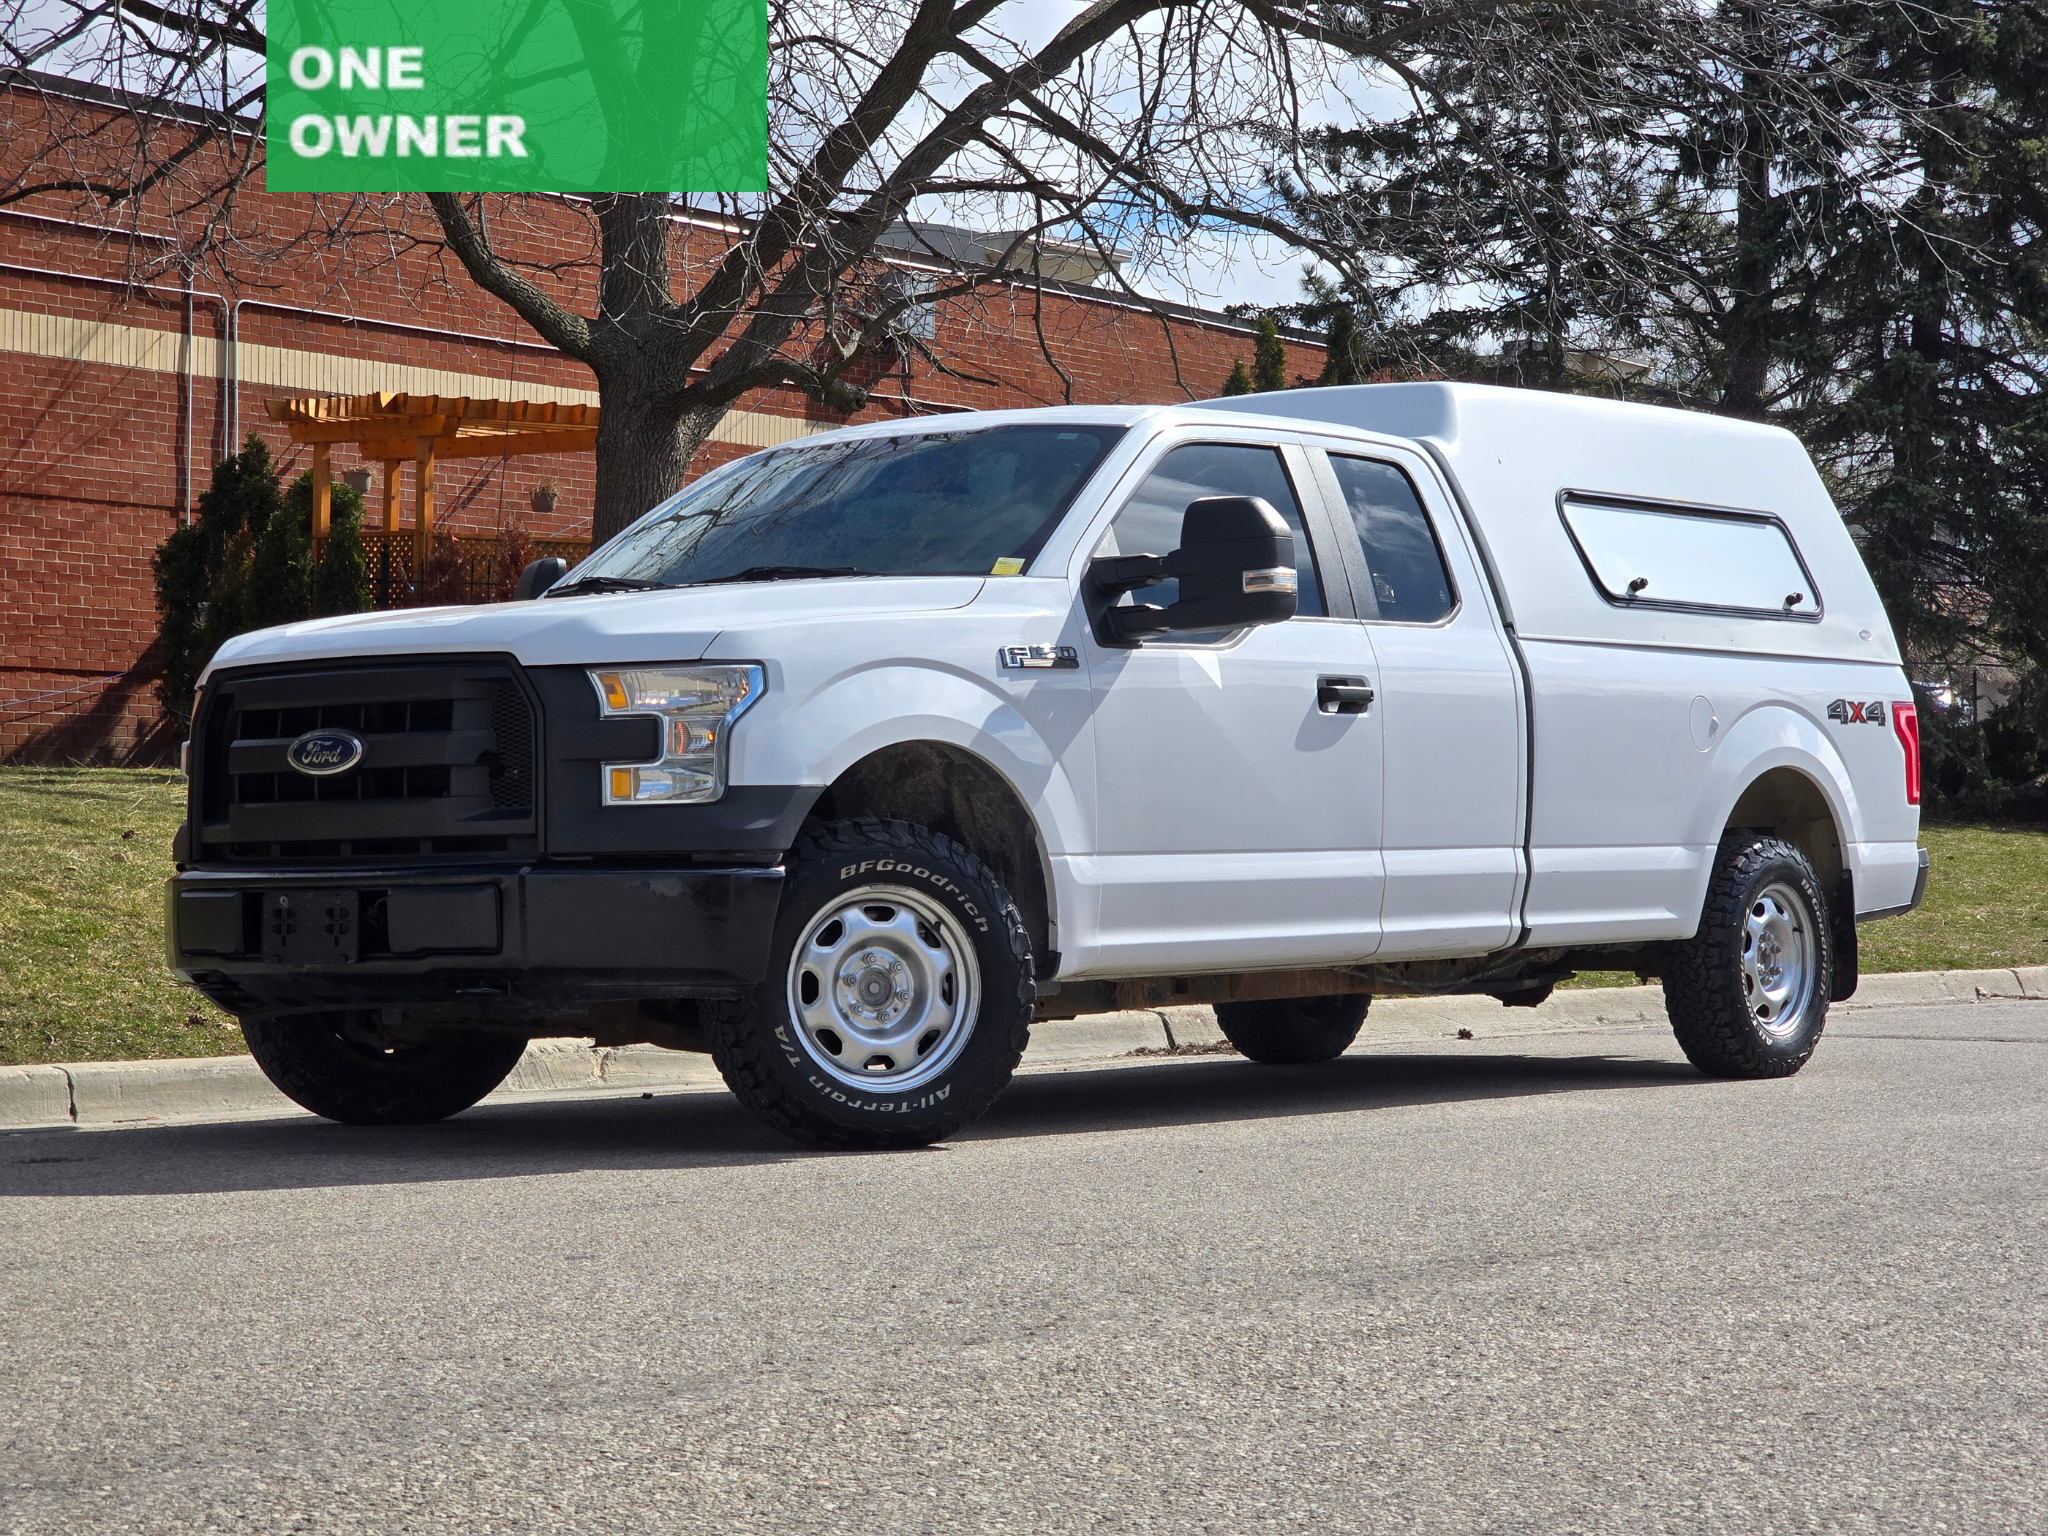 2016 Ford F-150 **One Owner, 5.0L V8, 4x4 ** (8 Foot Long Box)